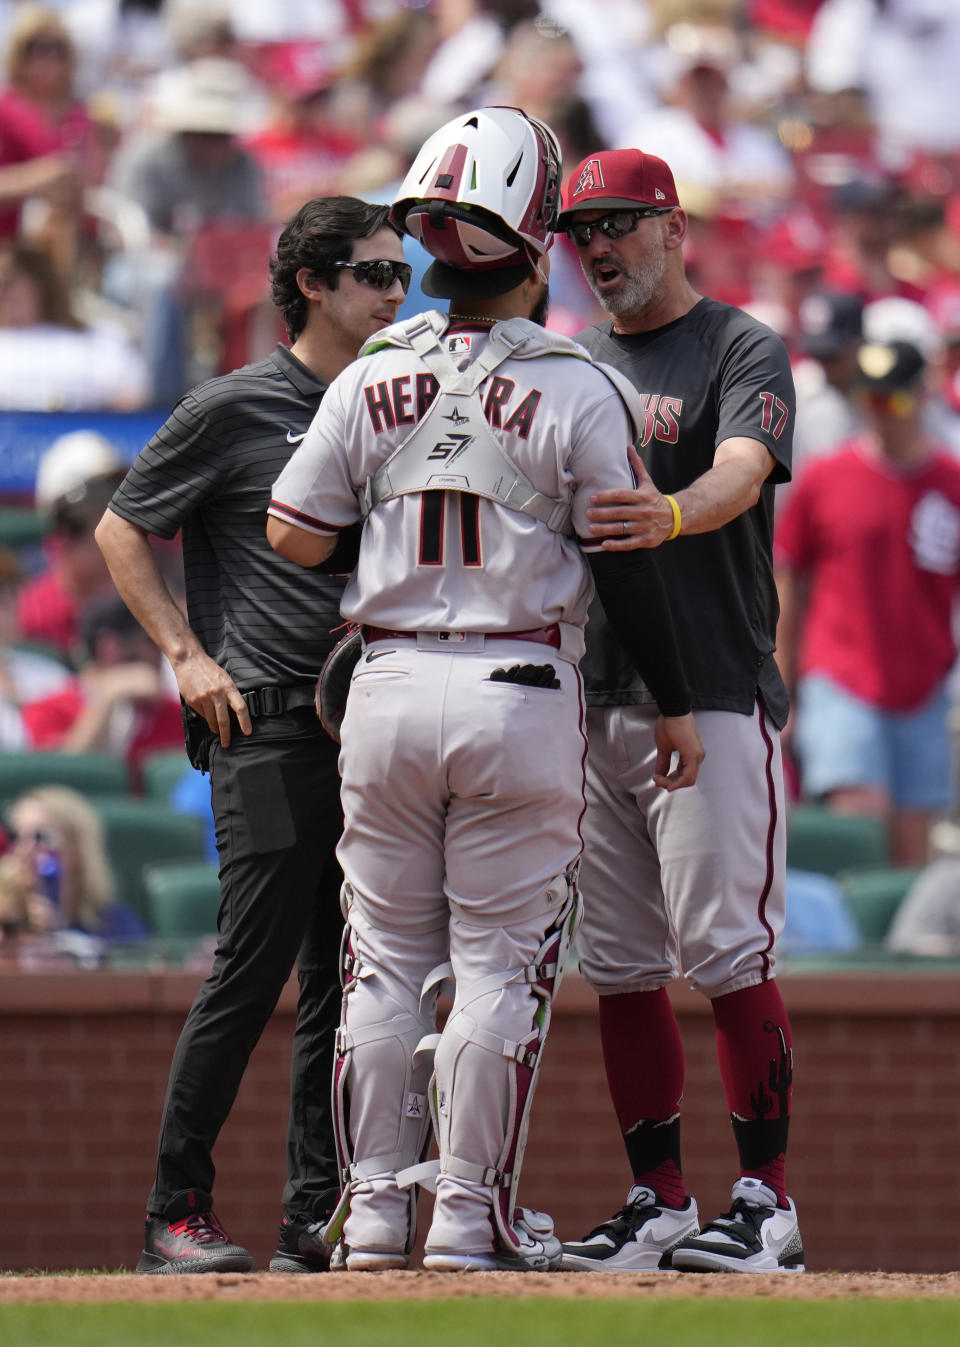 Arizona Diamondbacks catcher Jose Herrera (11) is checked on by Arizona Diamondbacks manager Torey Lovullo, right, and a trainer after taking a foul ball off his mask during the sixth inning of a baseball game against the St. Louis Cardinals Wednesday, April 19, 2023, in St. Louis. Herrera left the game. (AP Photo/Jeff Roberson)